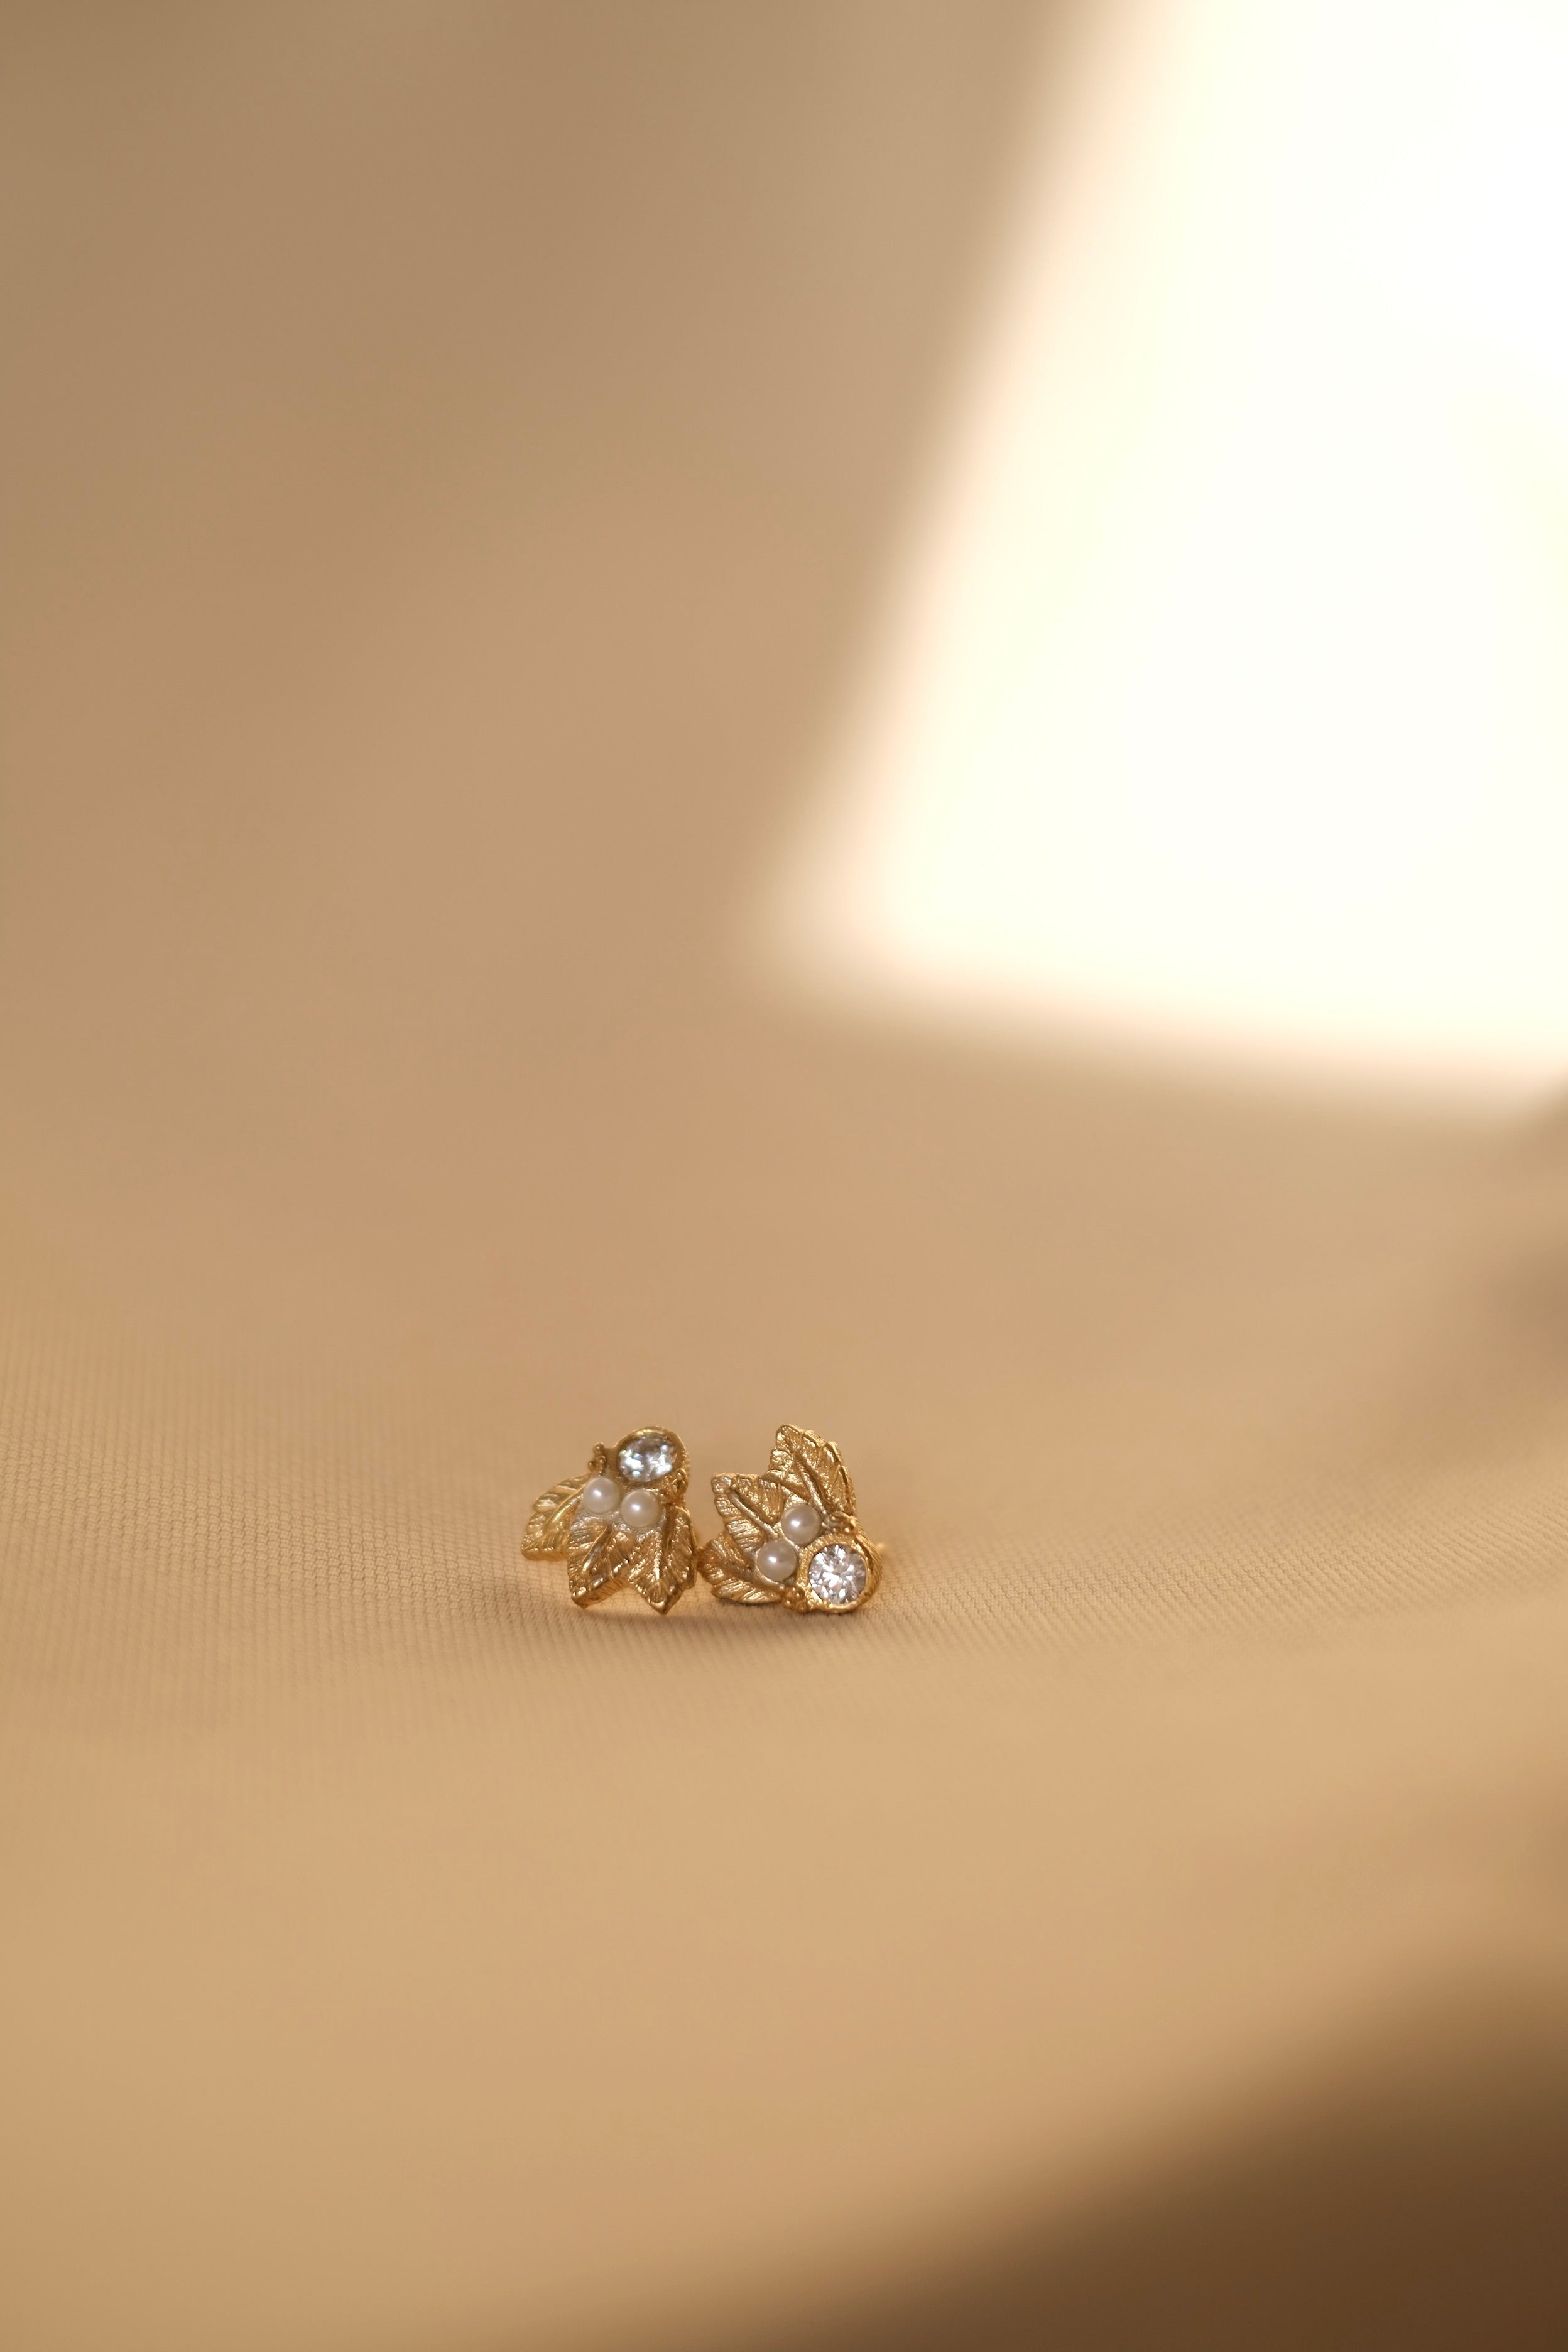 A pair of handcrafted The Muse I GP gold stud earrings on a beige background by Cremilde Bispo Jewellery.